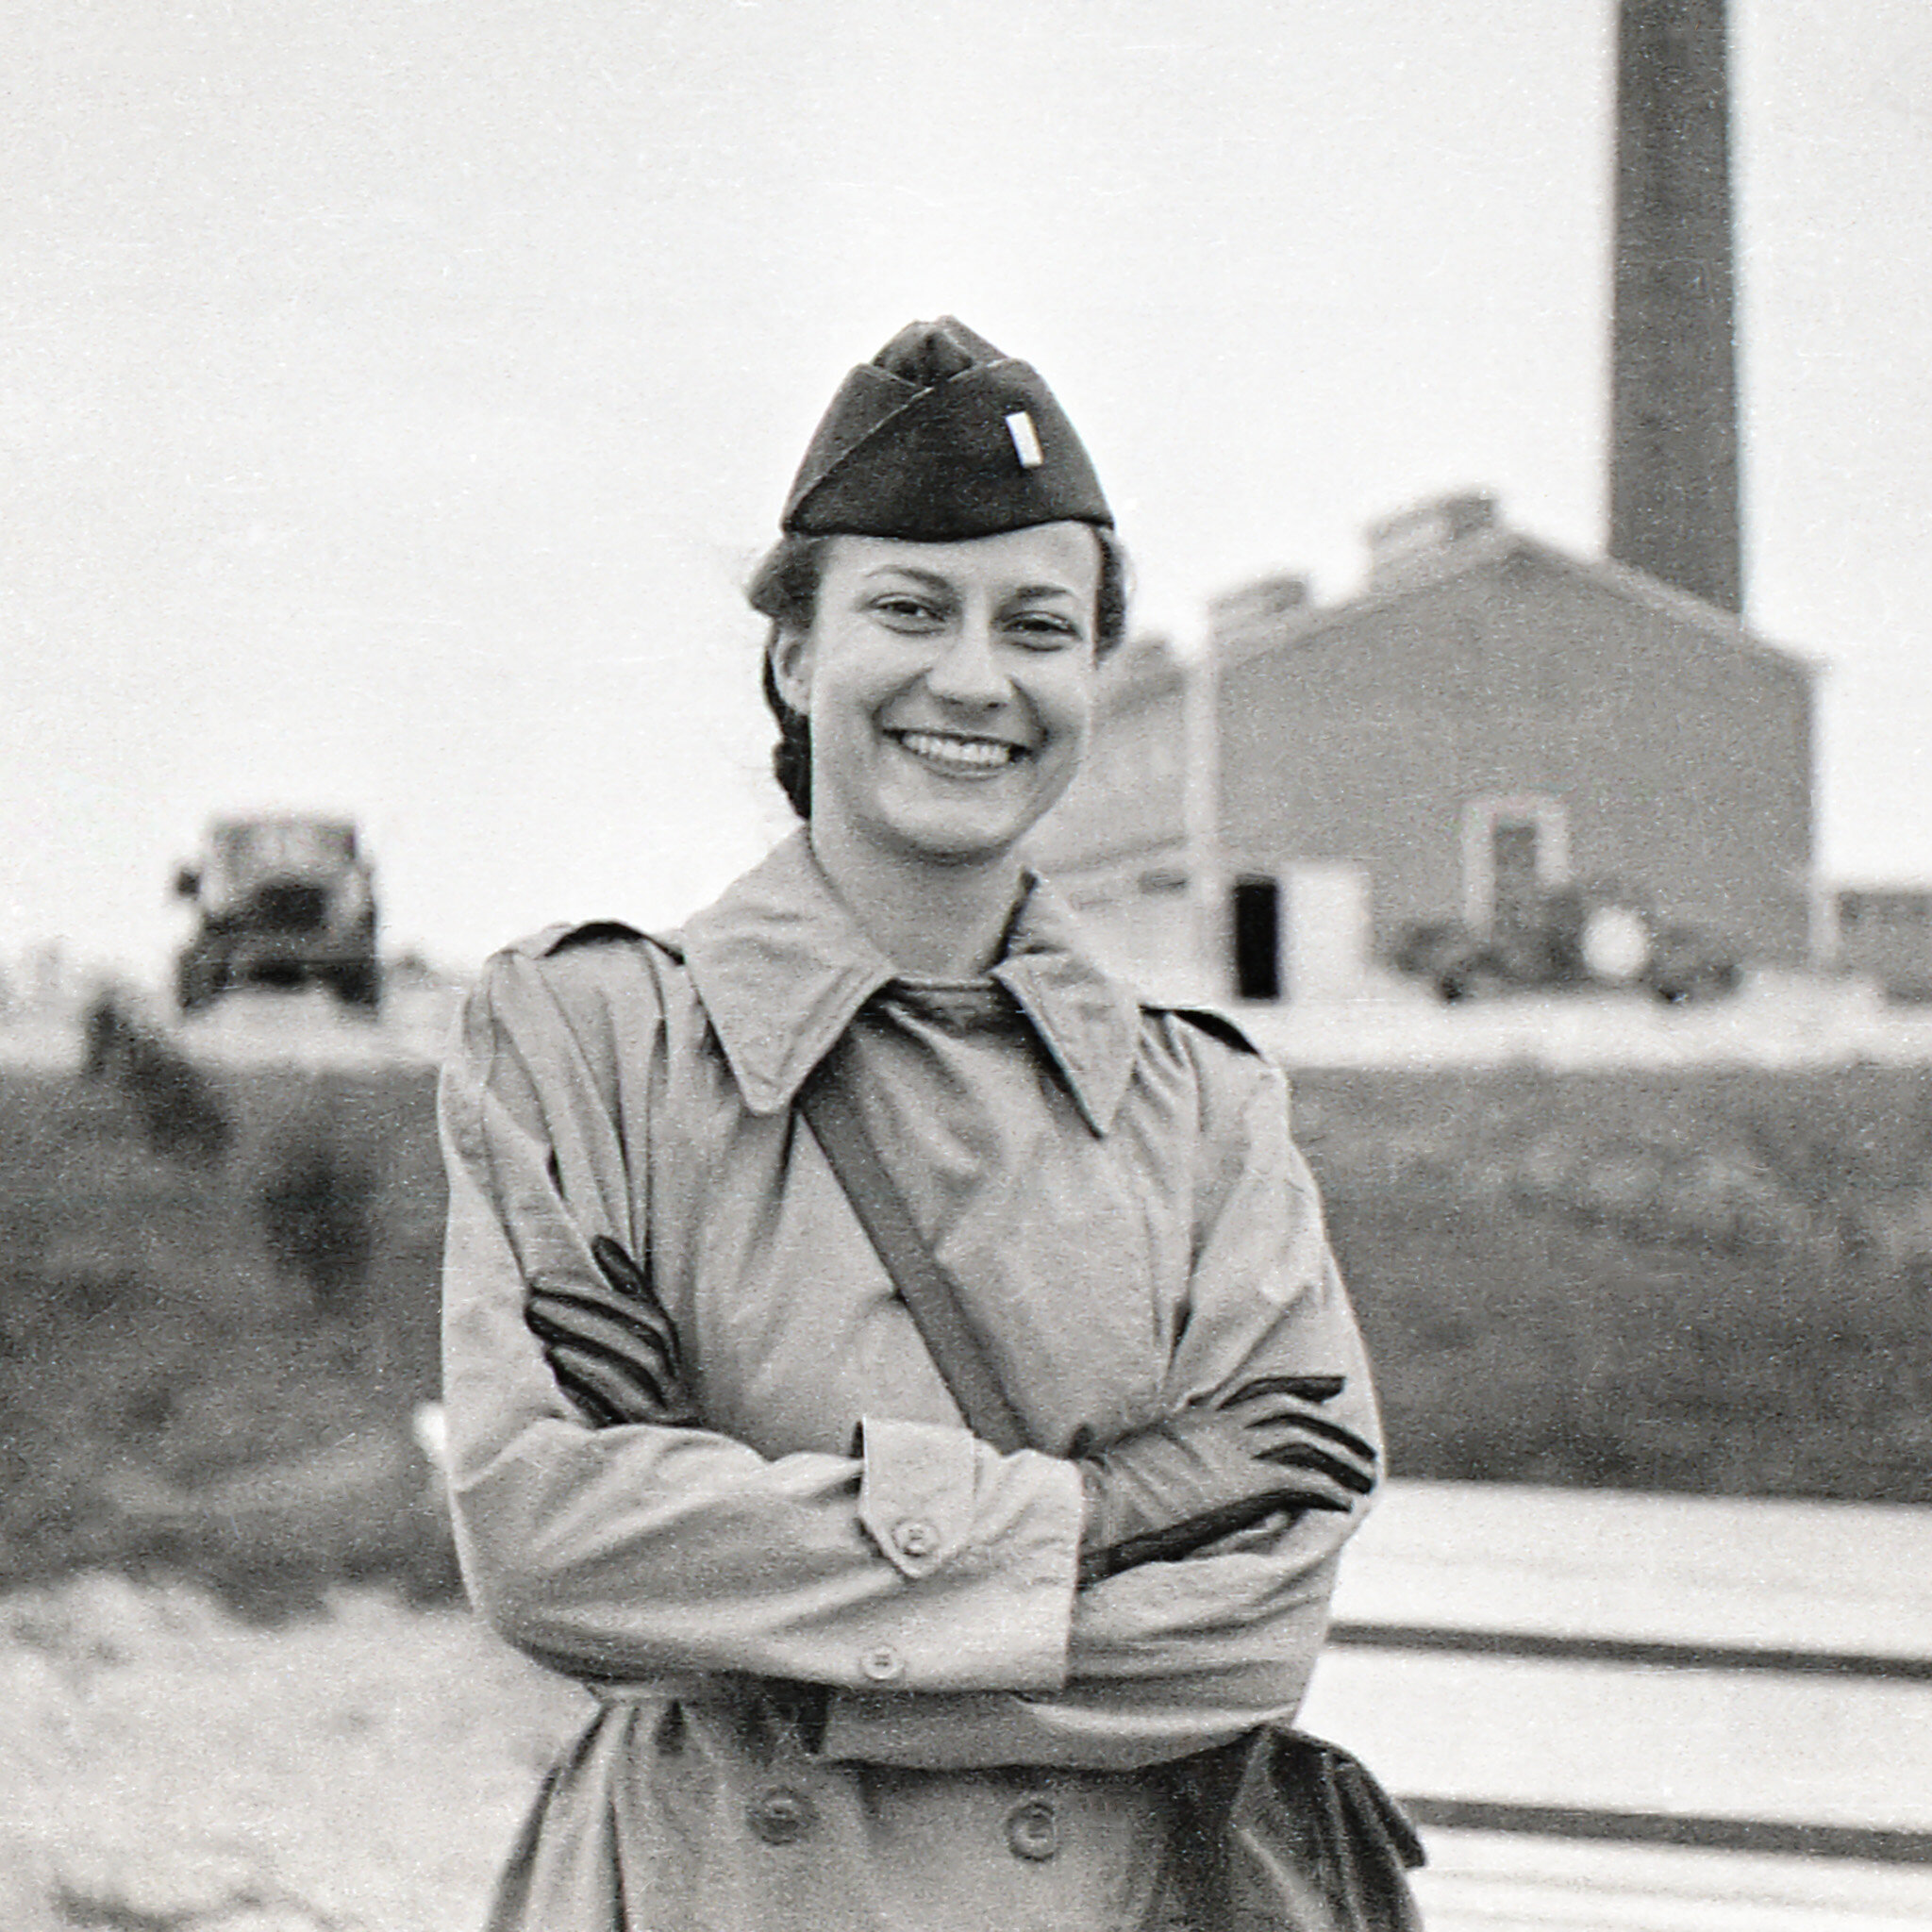 An Unidentified Army Nurse at Camp Grant